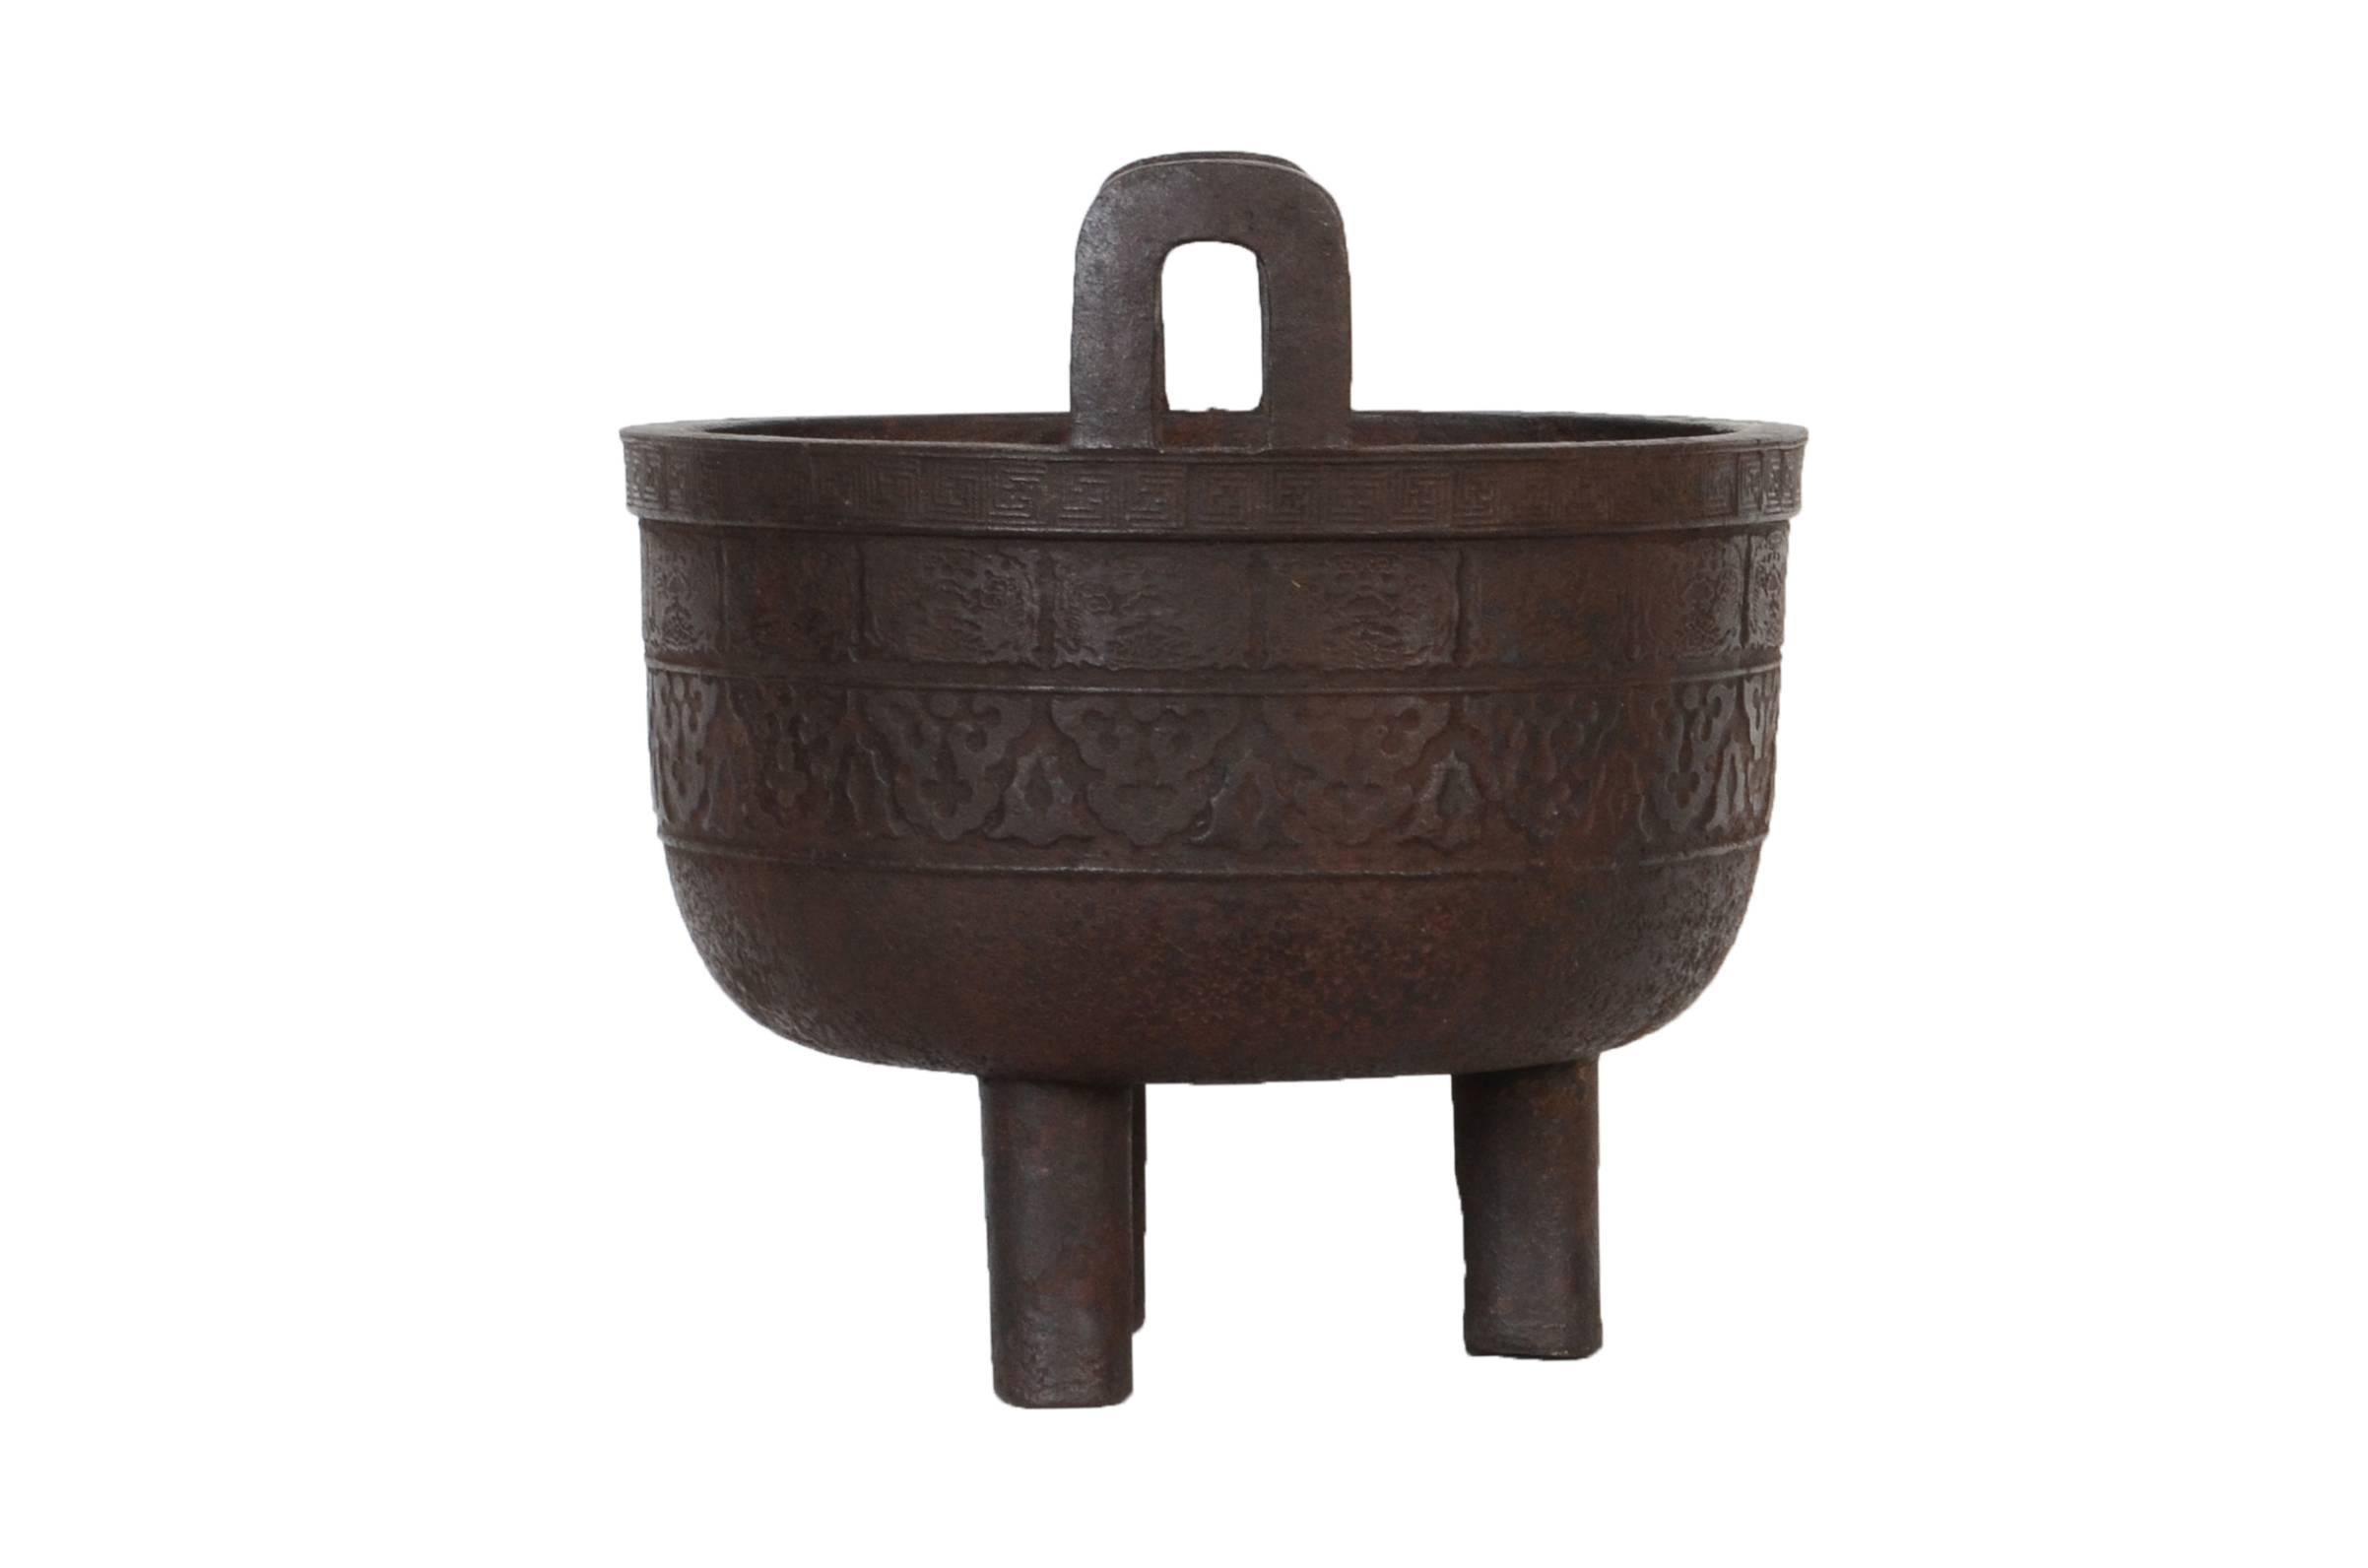 Cast Chinese Iron Incense Burner with Classical Archaic Motifs, Qing Dynasty